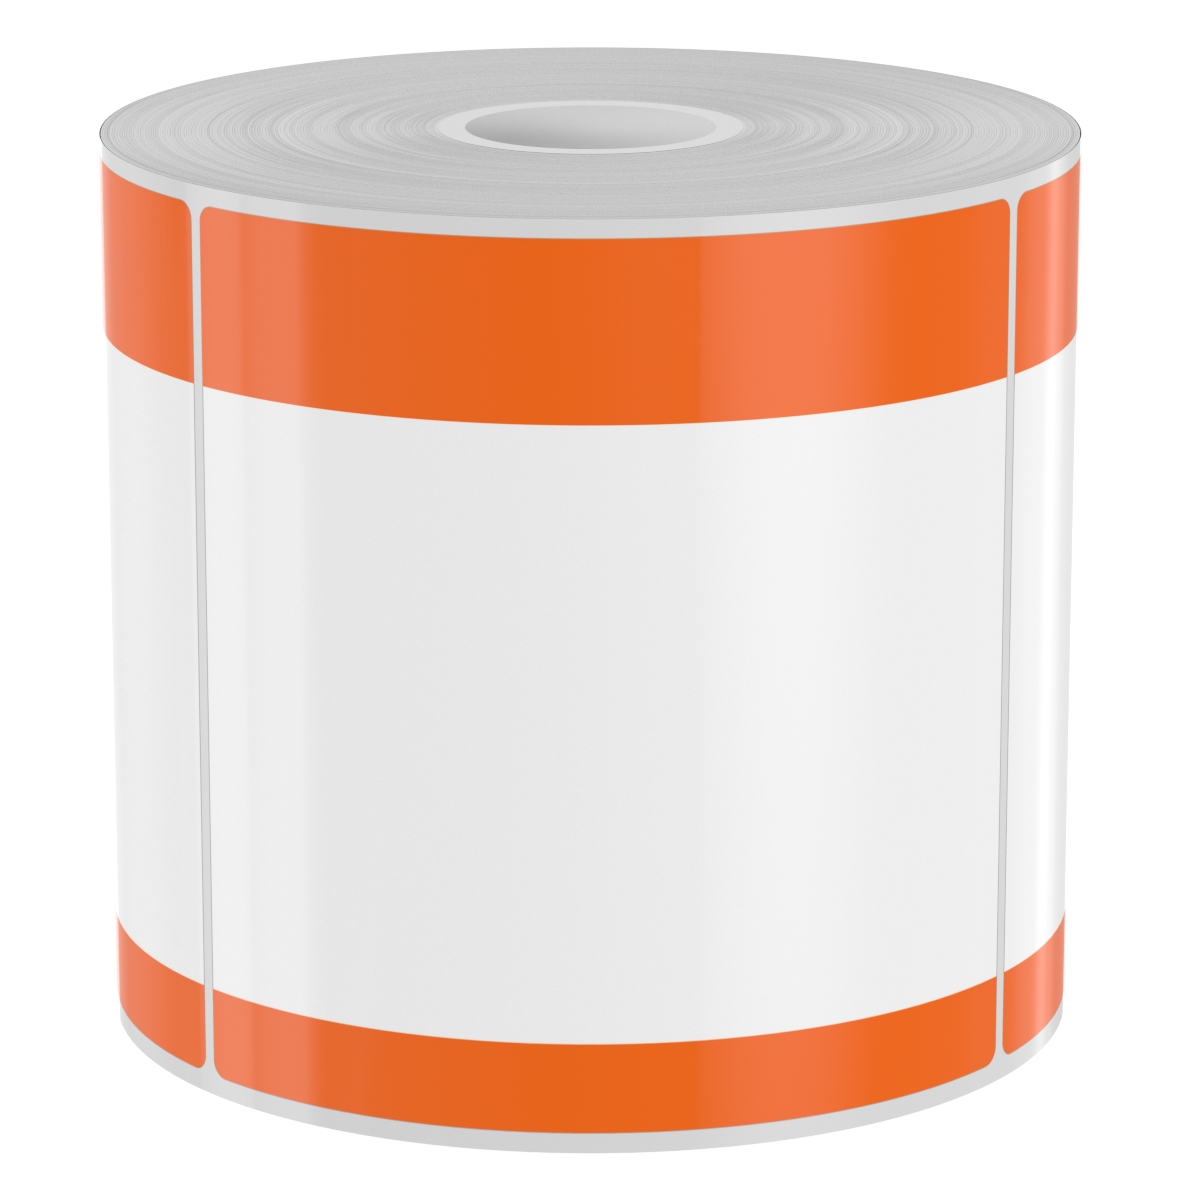 Ask a question about 250 4" x 4" High-Performance Die-Cut Orange Double Band